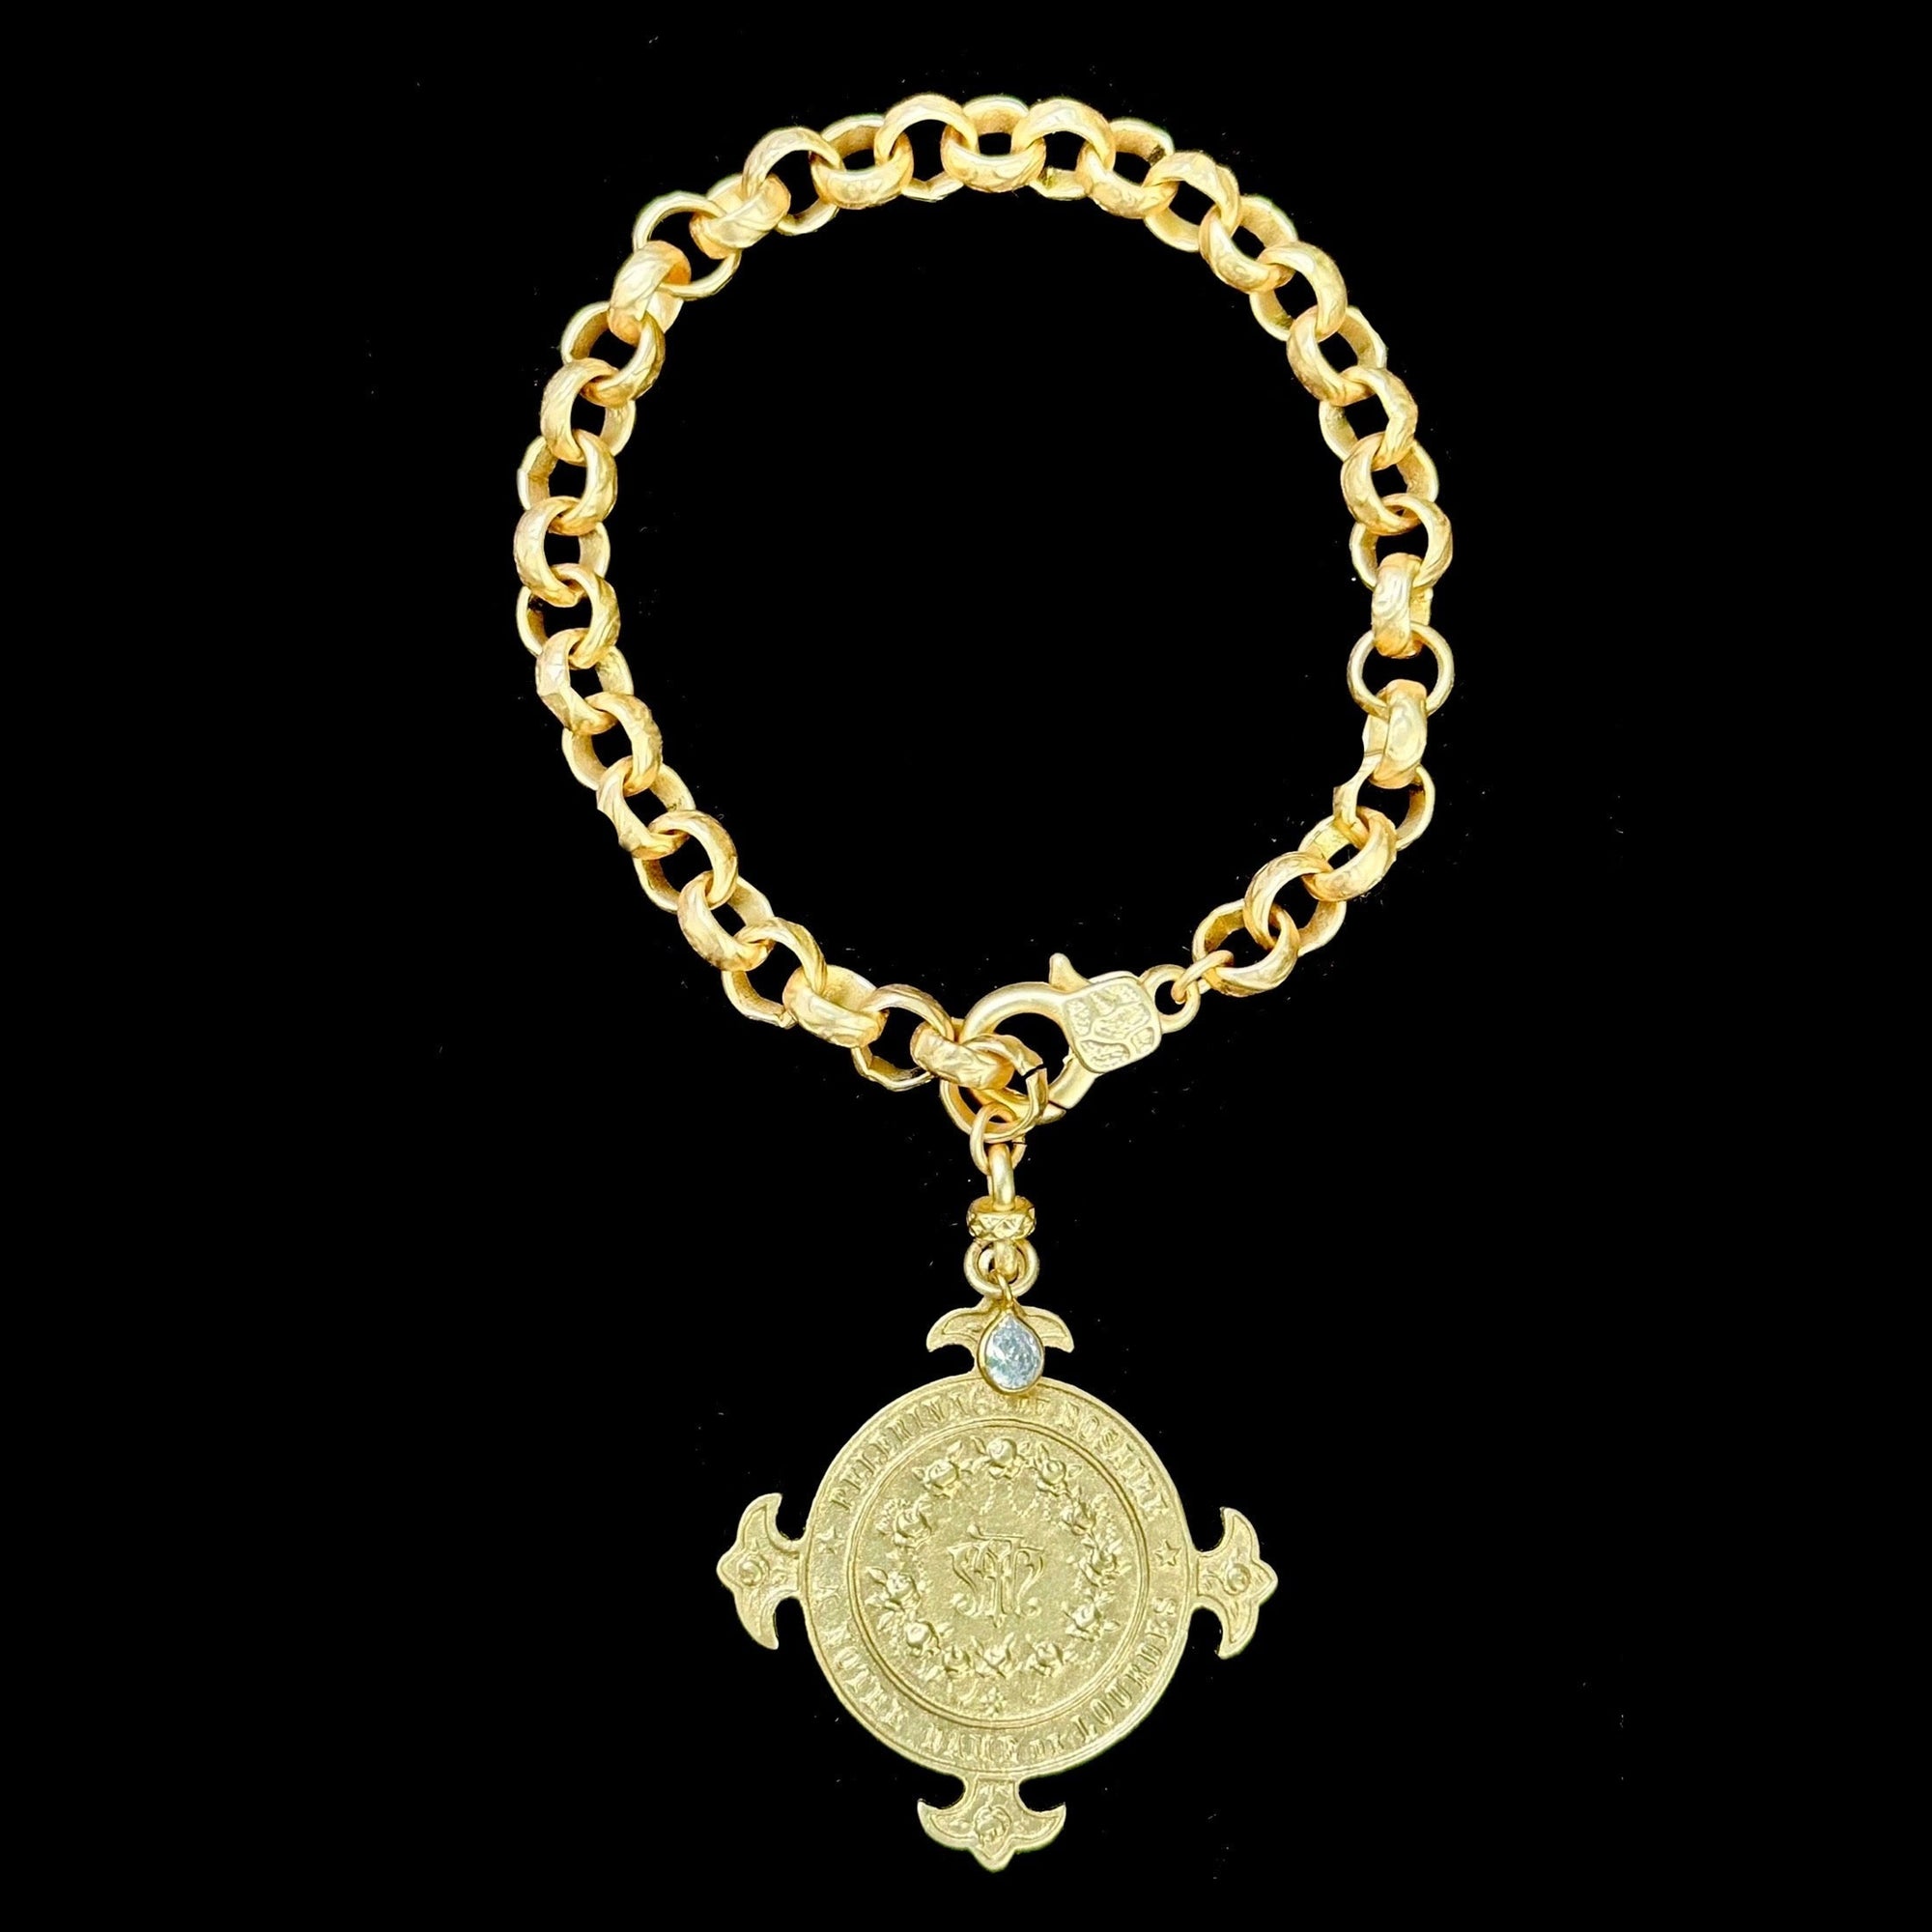 Lourdes Illumination Medieval Cable Chain Bracelet in Gold